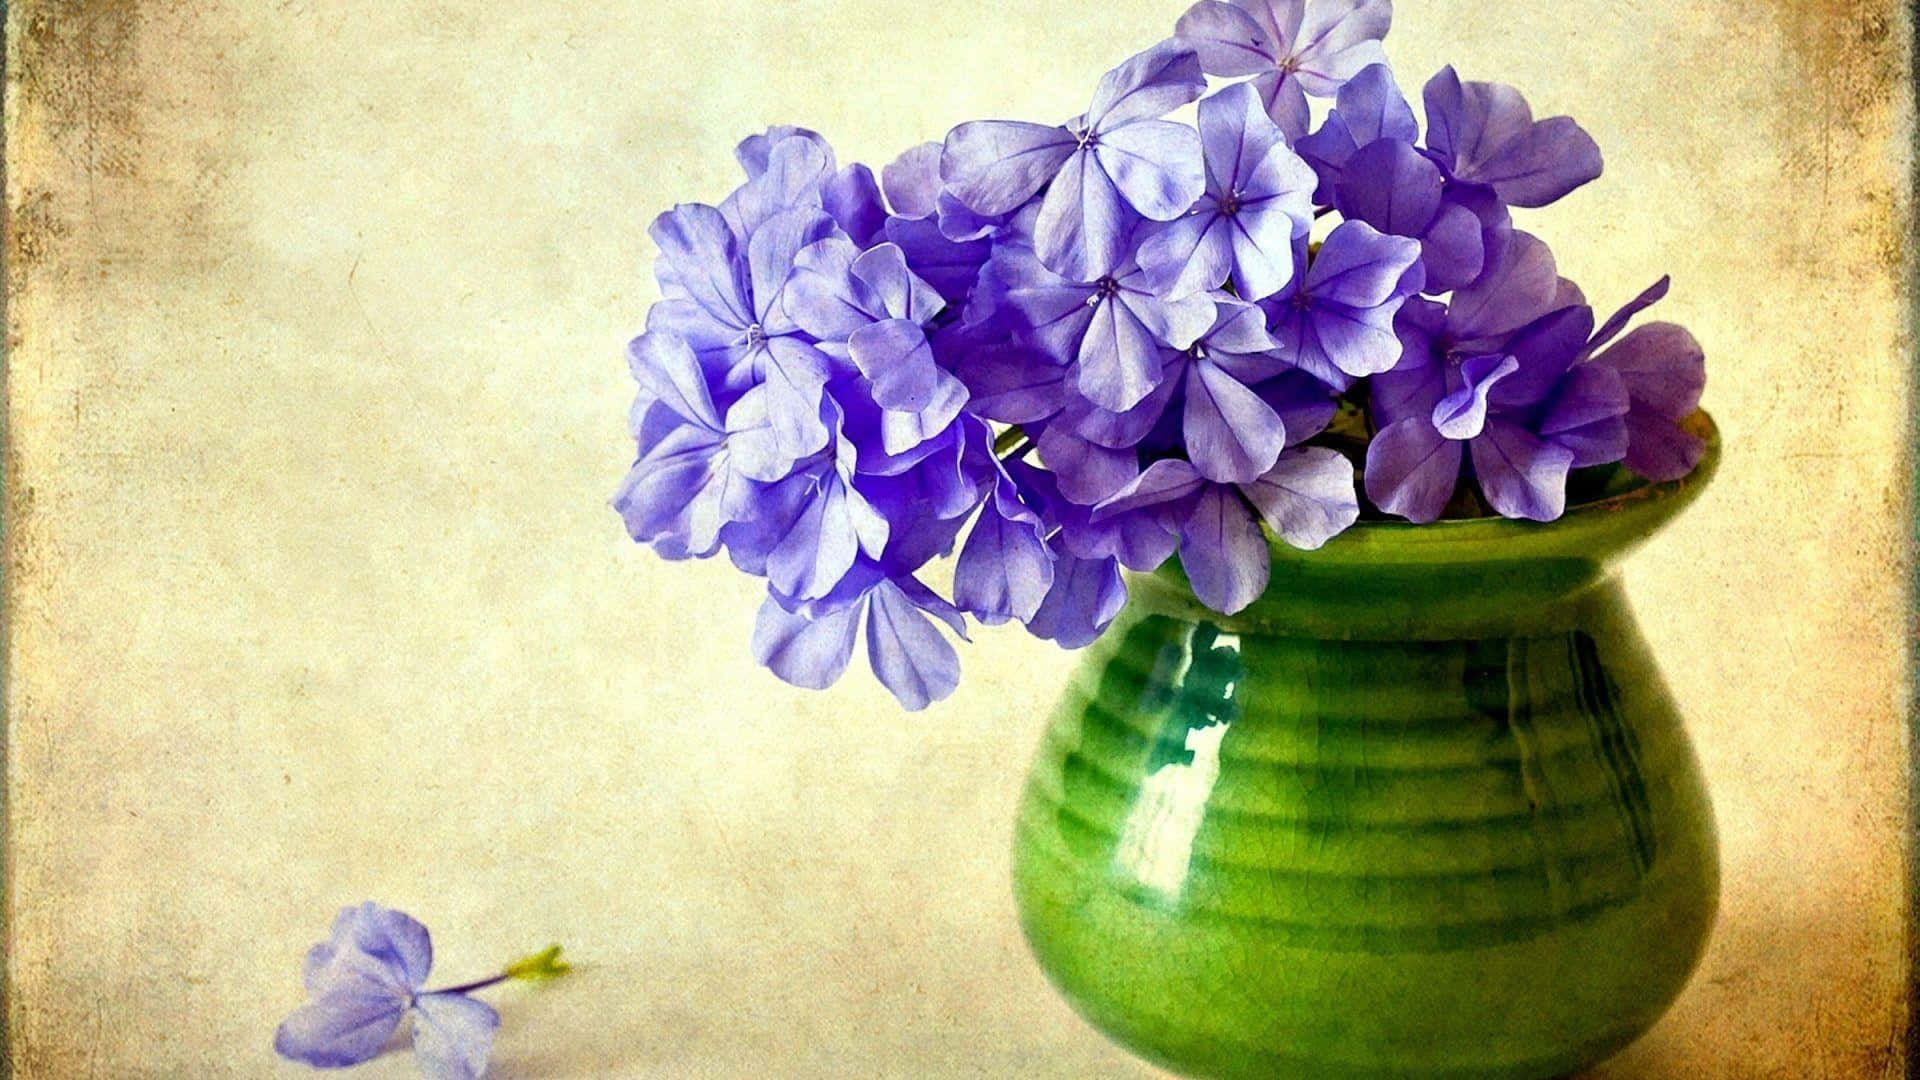 A Green Vase With Purple Flowers